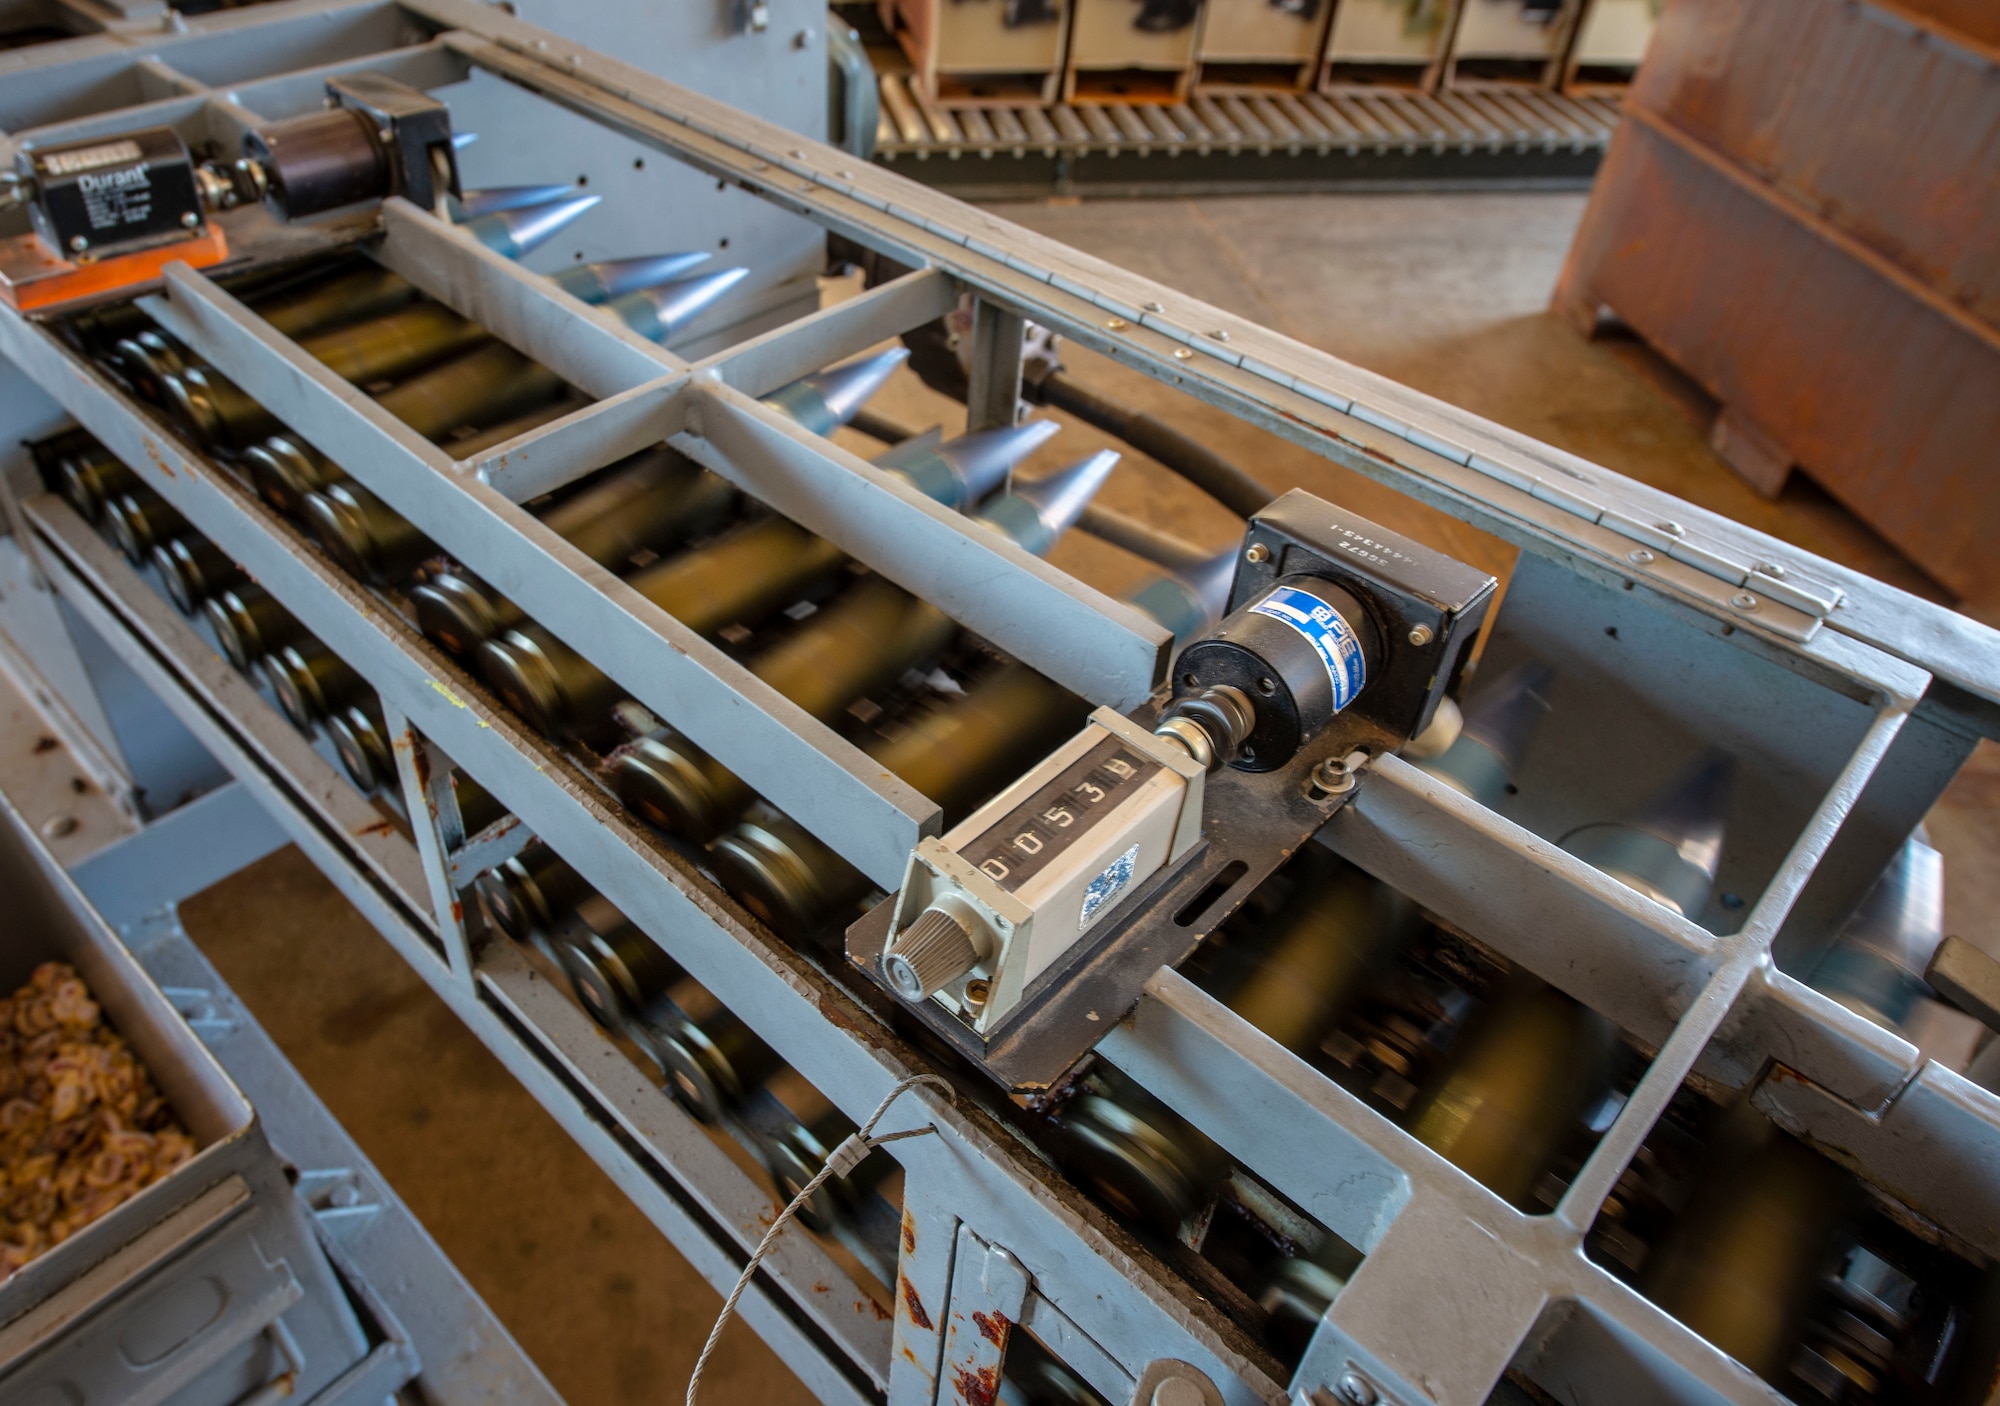 The GFU-7 displays the number of usable rounds as well as separates the 30mm brass from plastic containers at Nellis Air Force Base, Nev., June 4, 2019. The machine is used to separate the 30mm ammunition downloaded from A-10 Thunderbolts and returns the good rounds to another container, making them reusable for reloading onto the aircraft. (U.S. Air Force photo by Staff Sgt. Tabatha McCarthy)